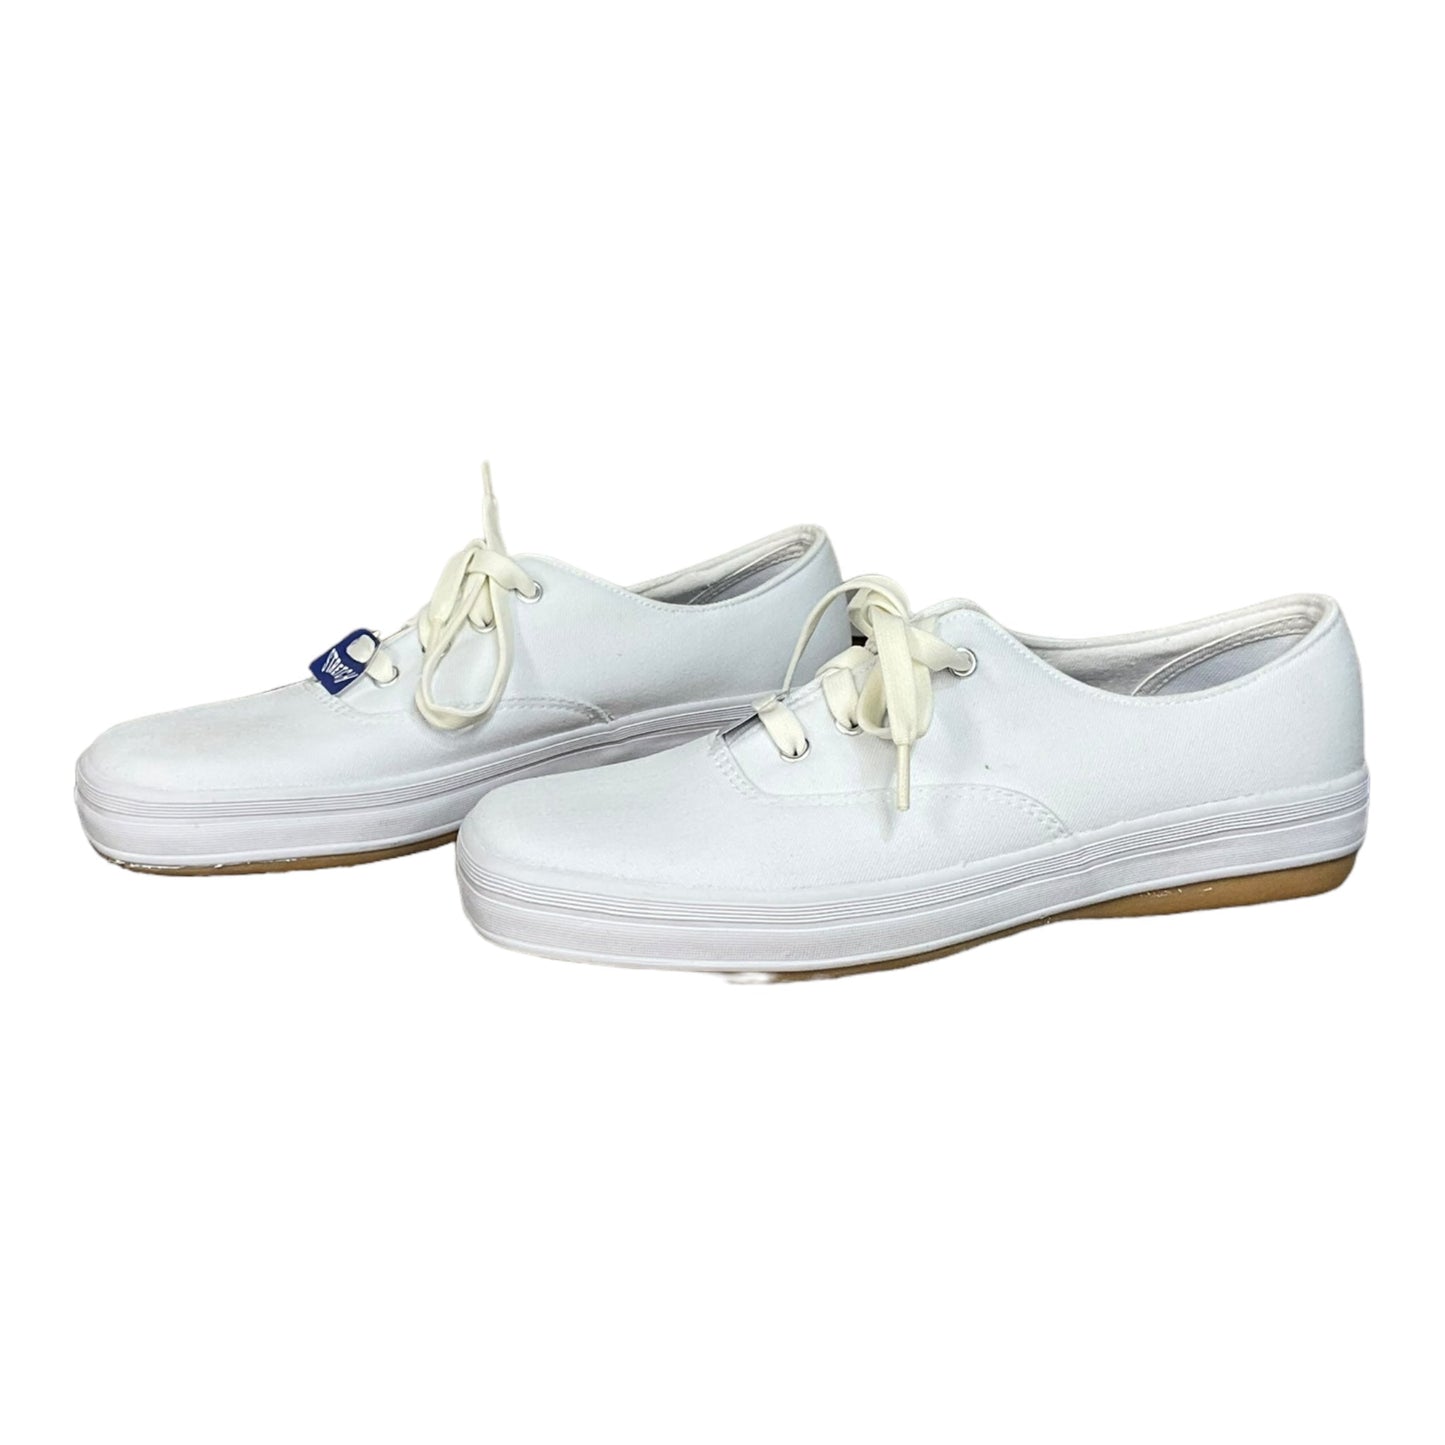 White Shoes Sneakers Keds, Size 8